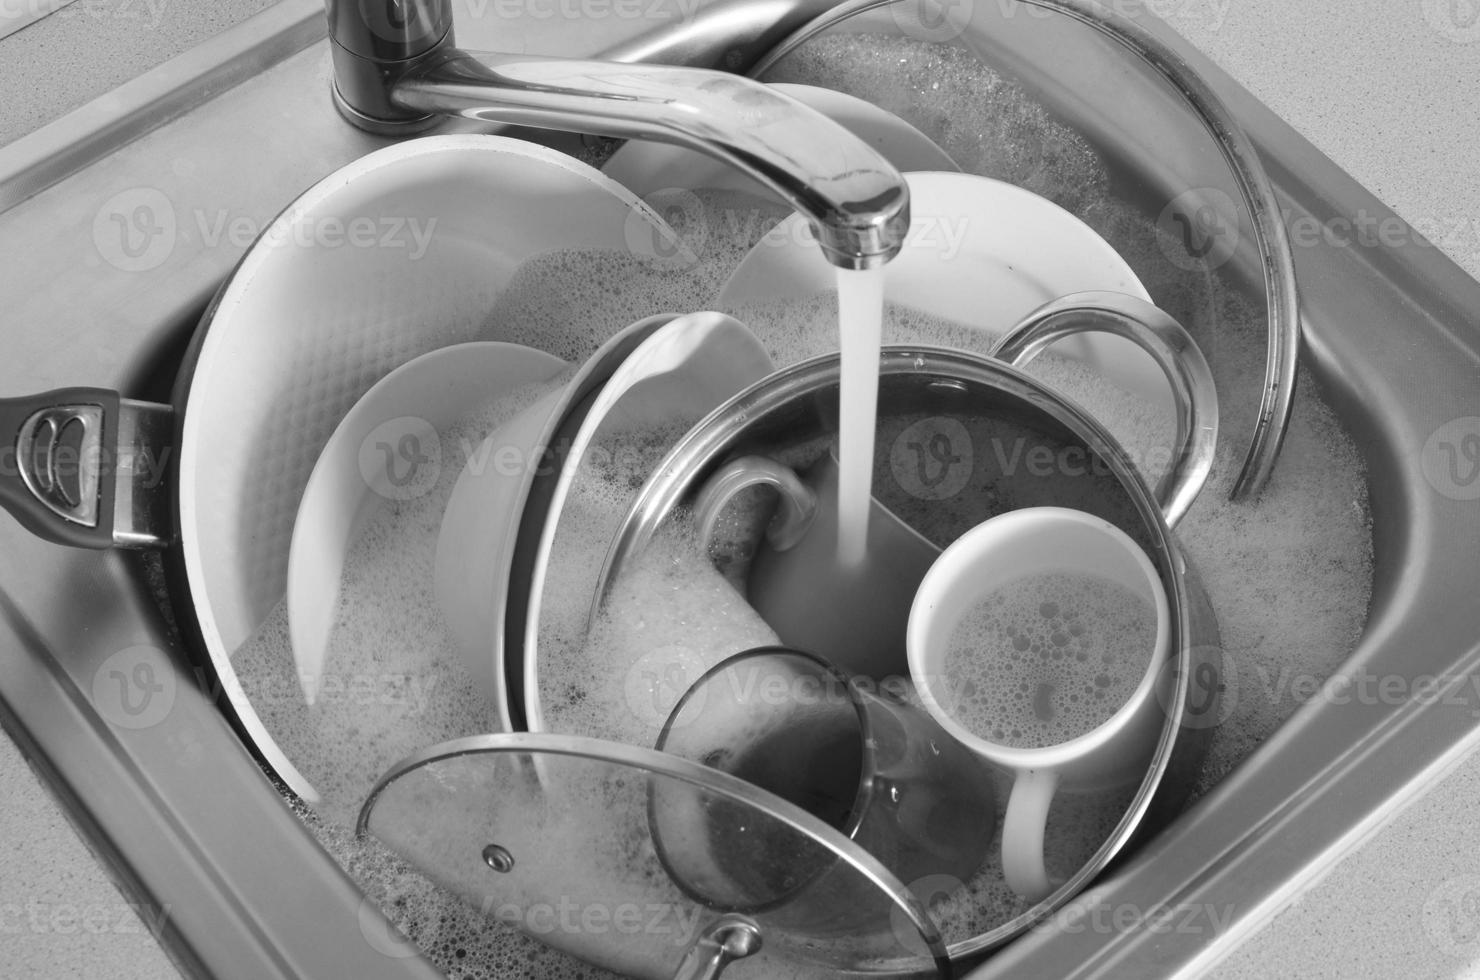 Dirty dishes and unwashed kitchen appliances lie in foam water under a tap from kitchen faucet photo